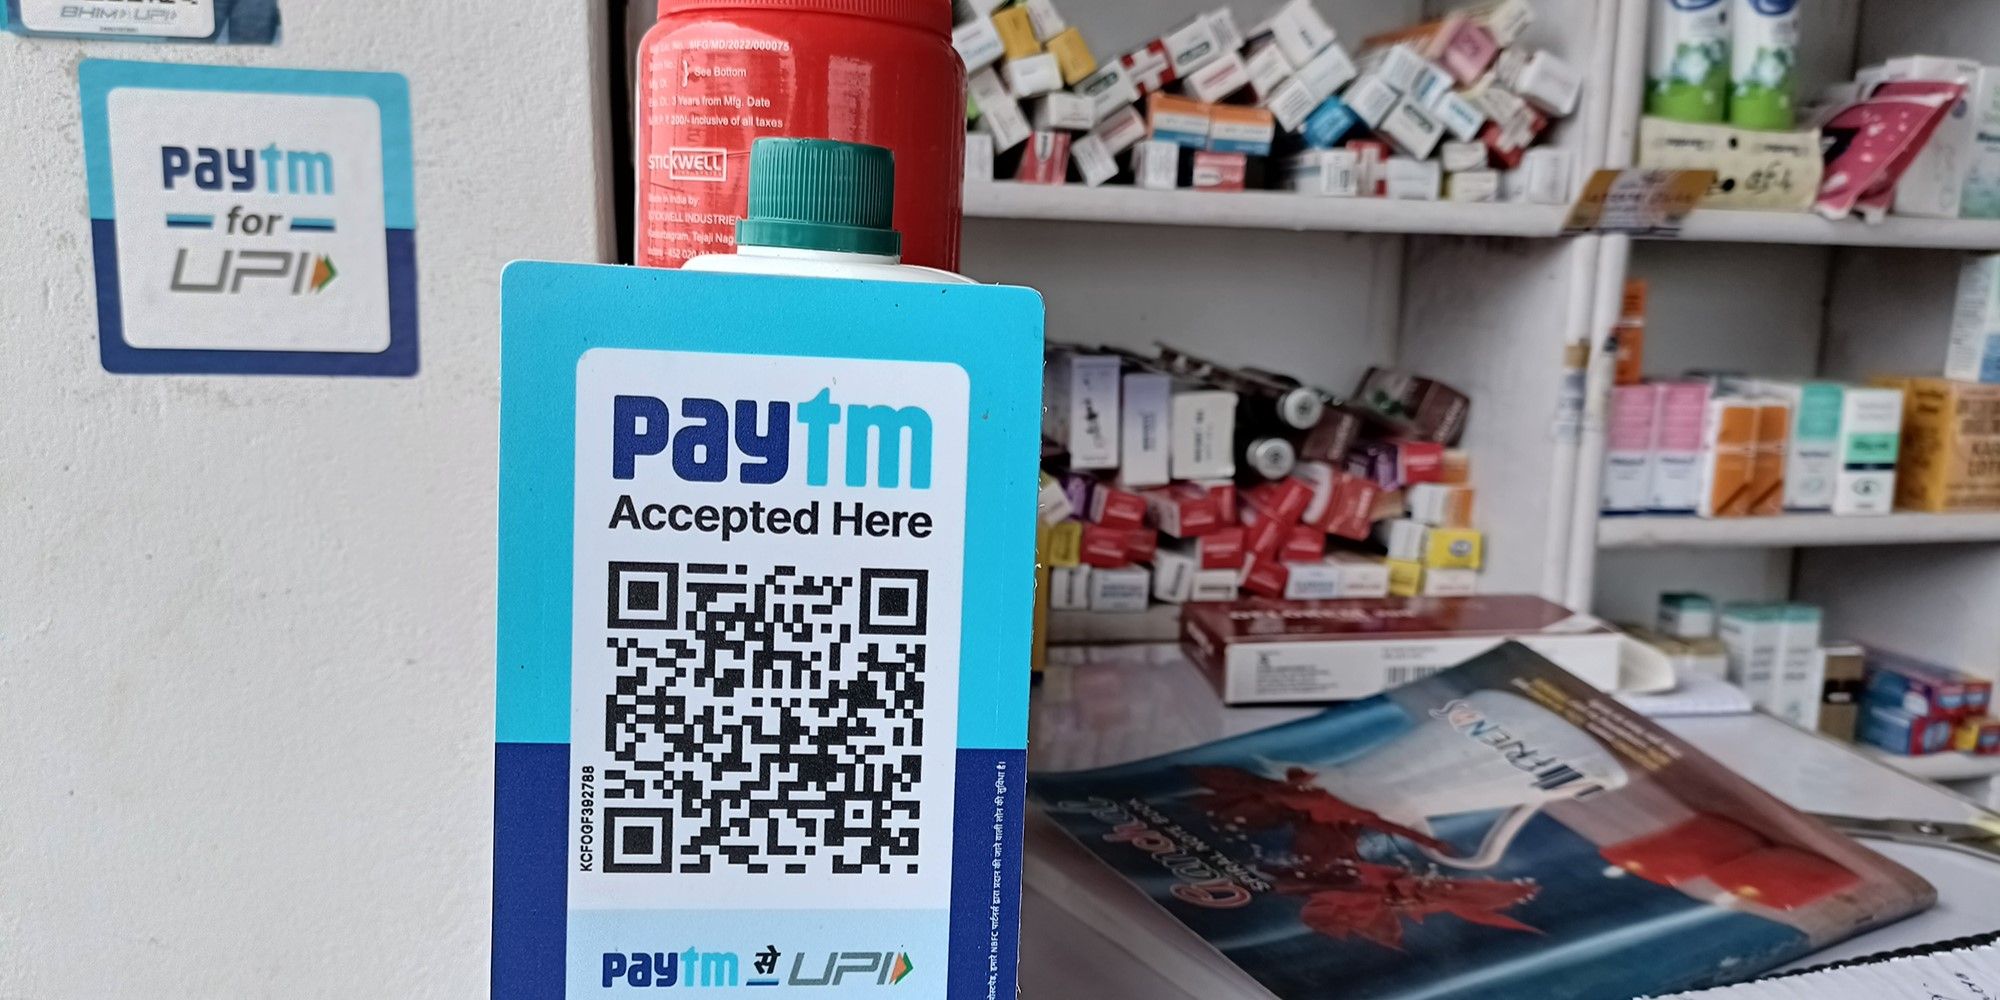 Paytm hiring for various positions; claims high interest from top talents